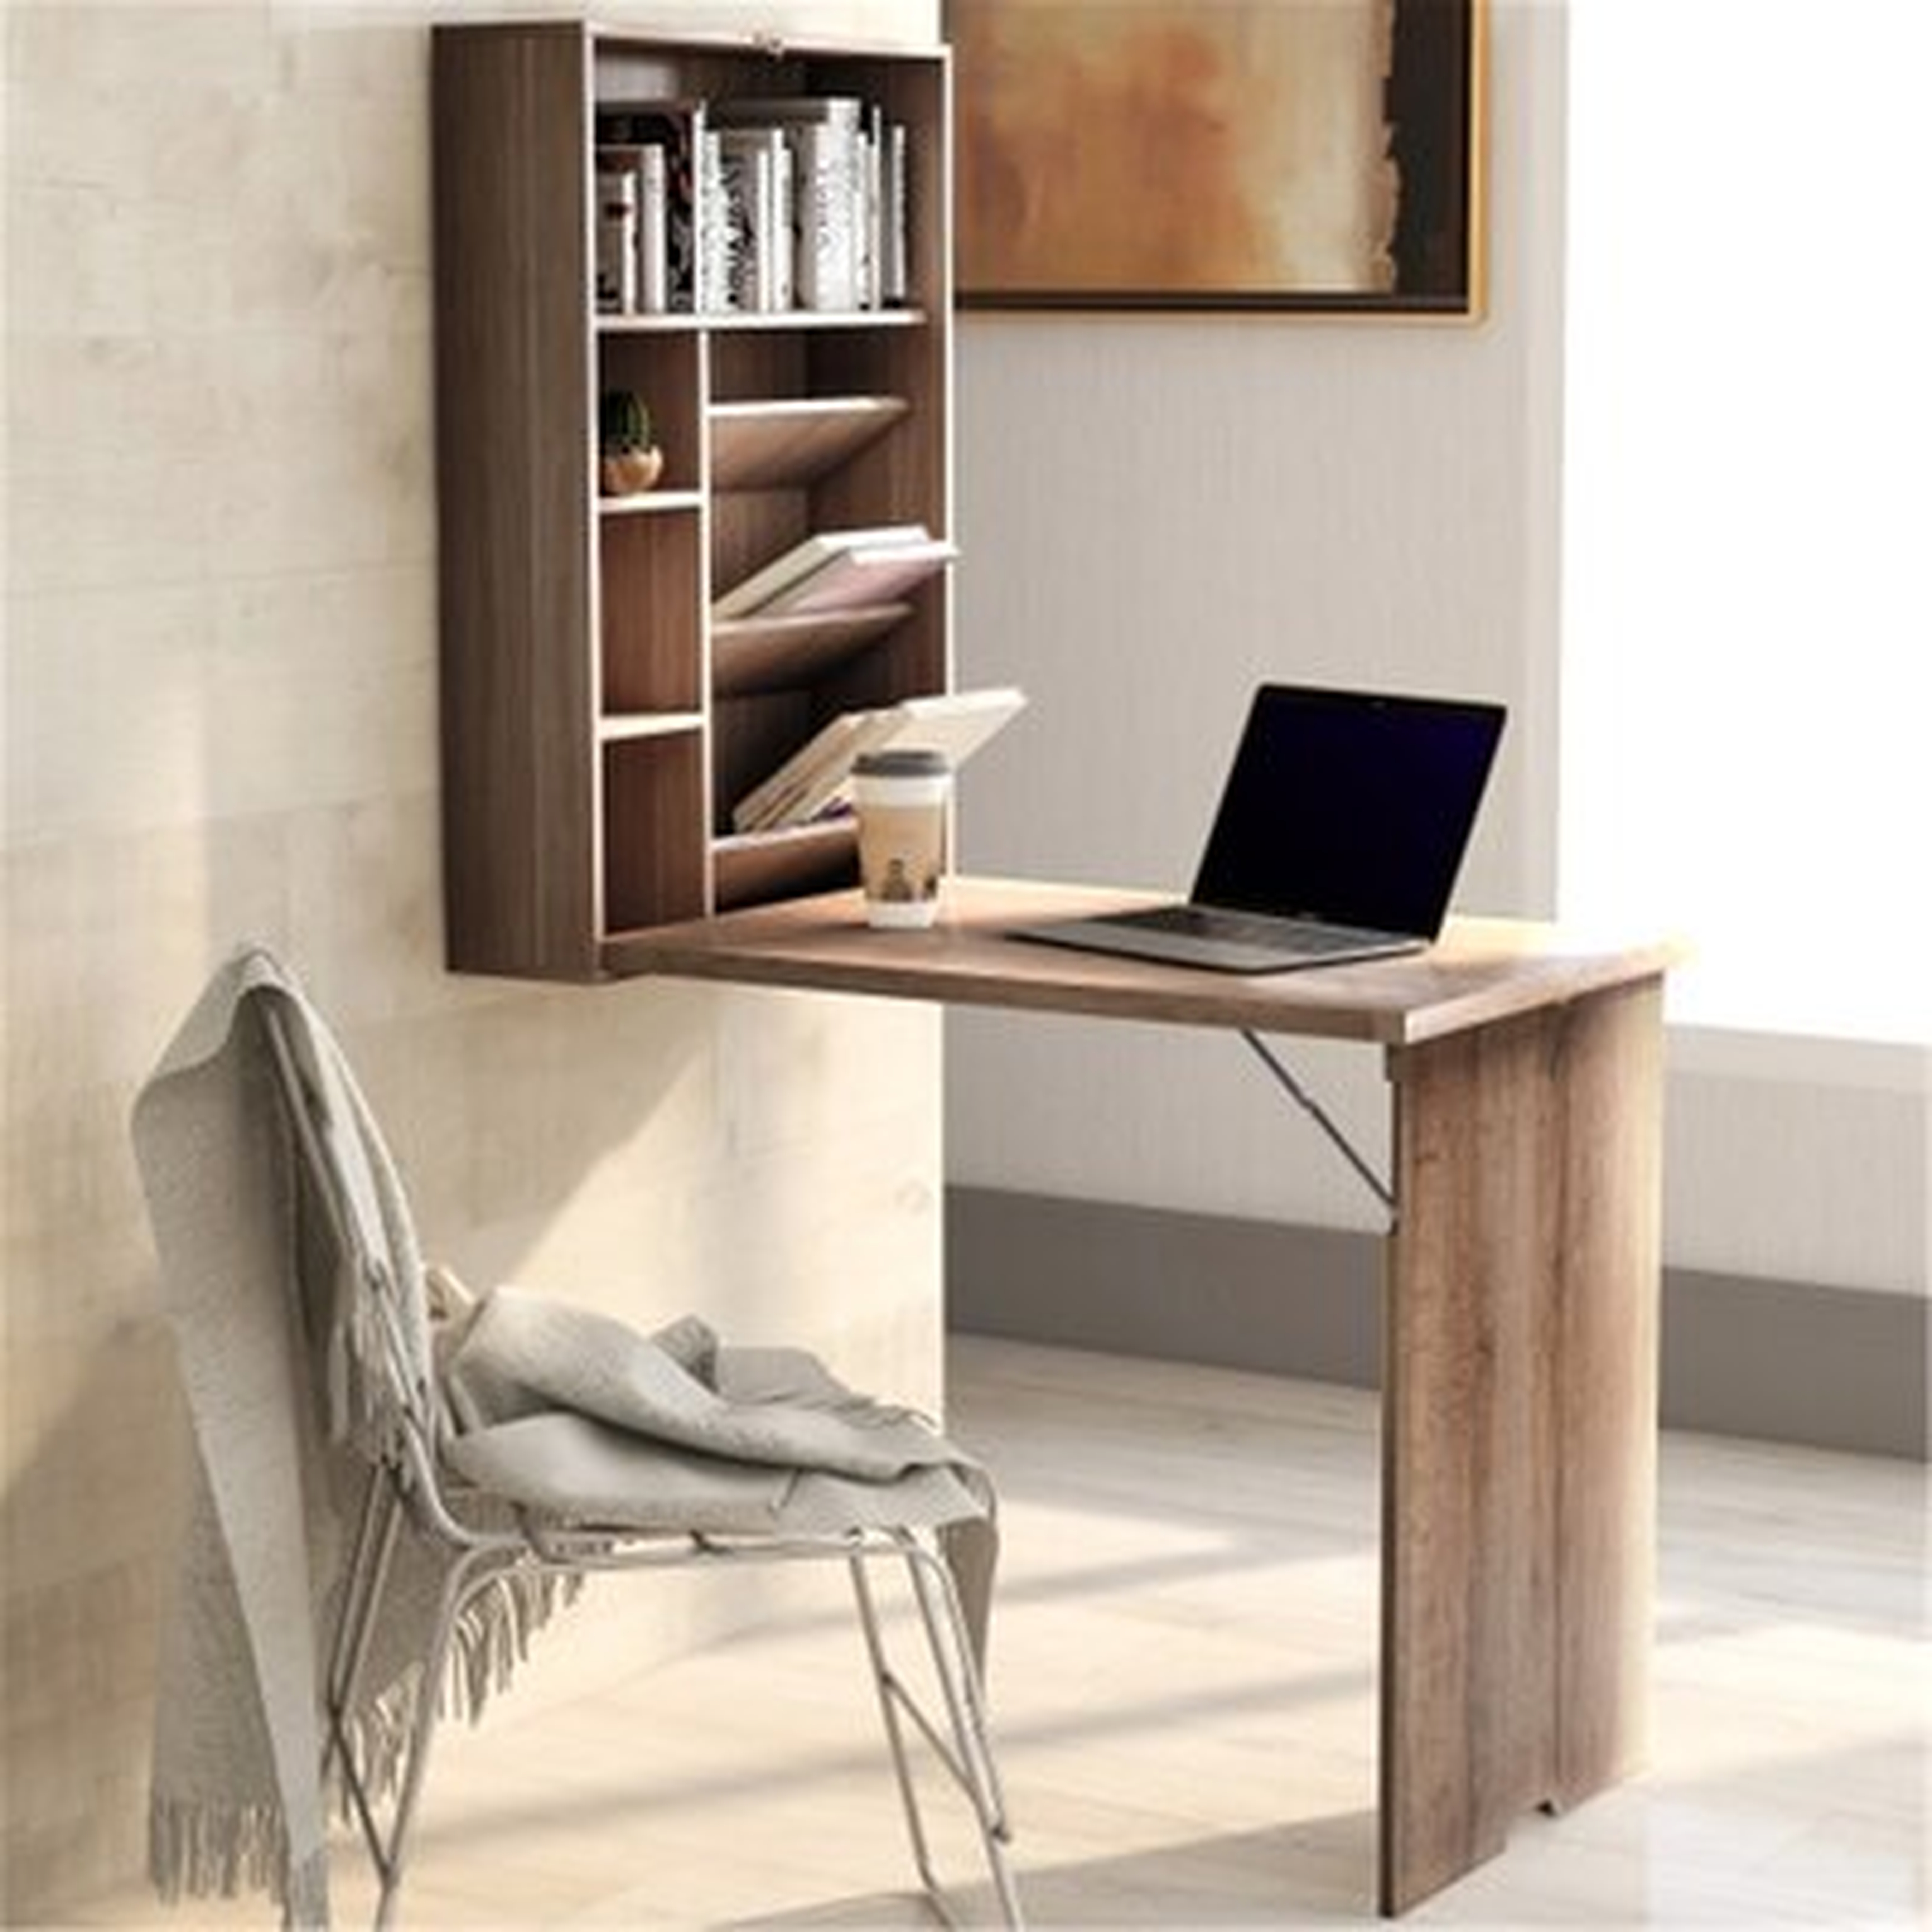 Multi-Function Computer Desk,Wall Mounted Fold Out Table,Floating Desk With Hutch - Wayfair